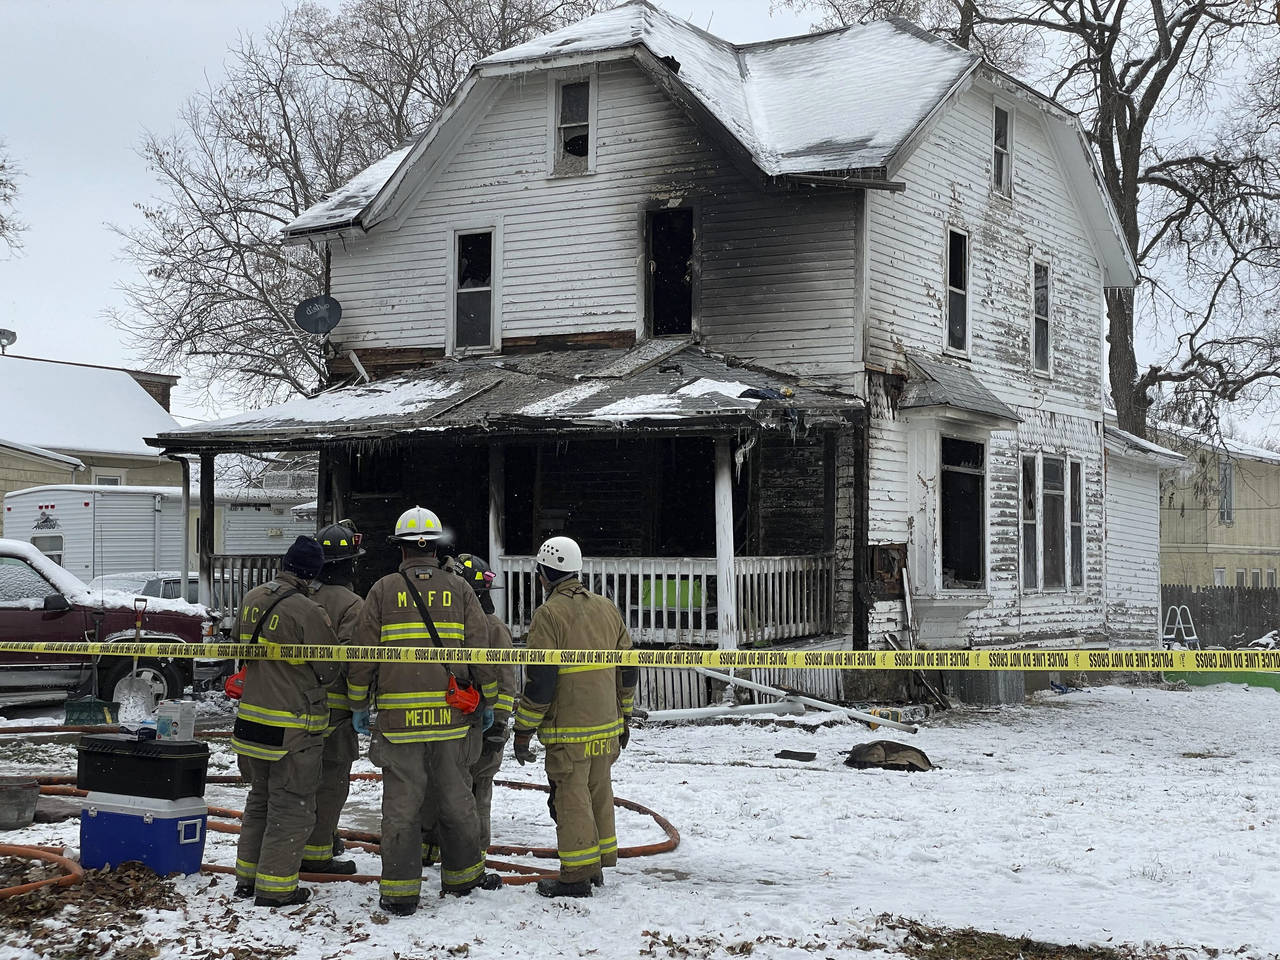 Mason City, Iowa, firefighters look on after containing a fire at a home on Washington Avenue in Ma...